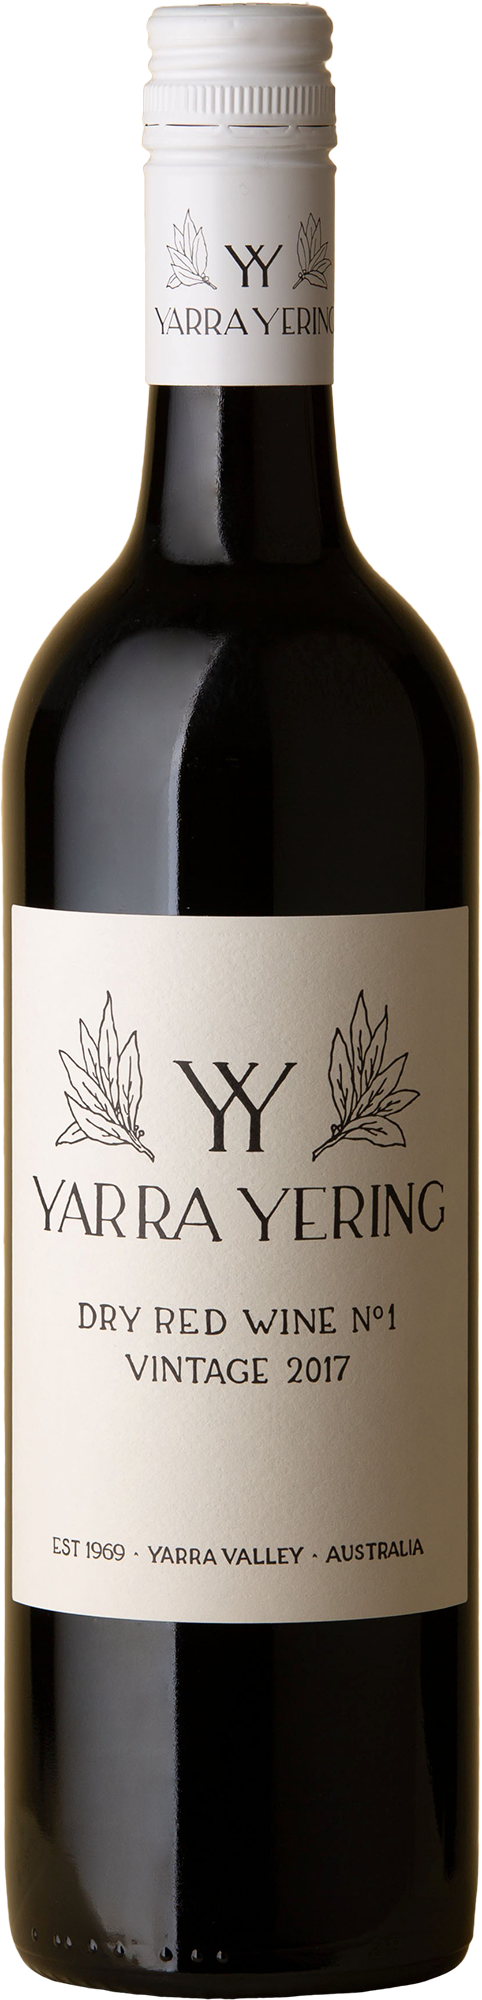 Yarra Yering - Dry Red No. 1 Red Blend 2017 Red Wine